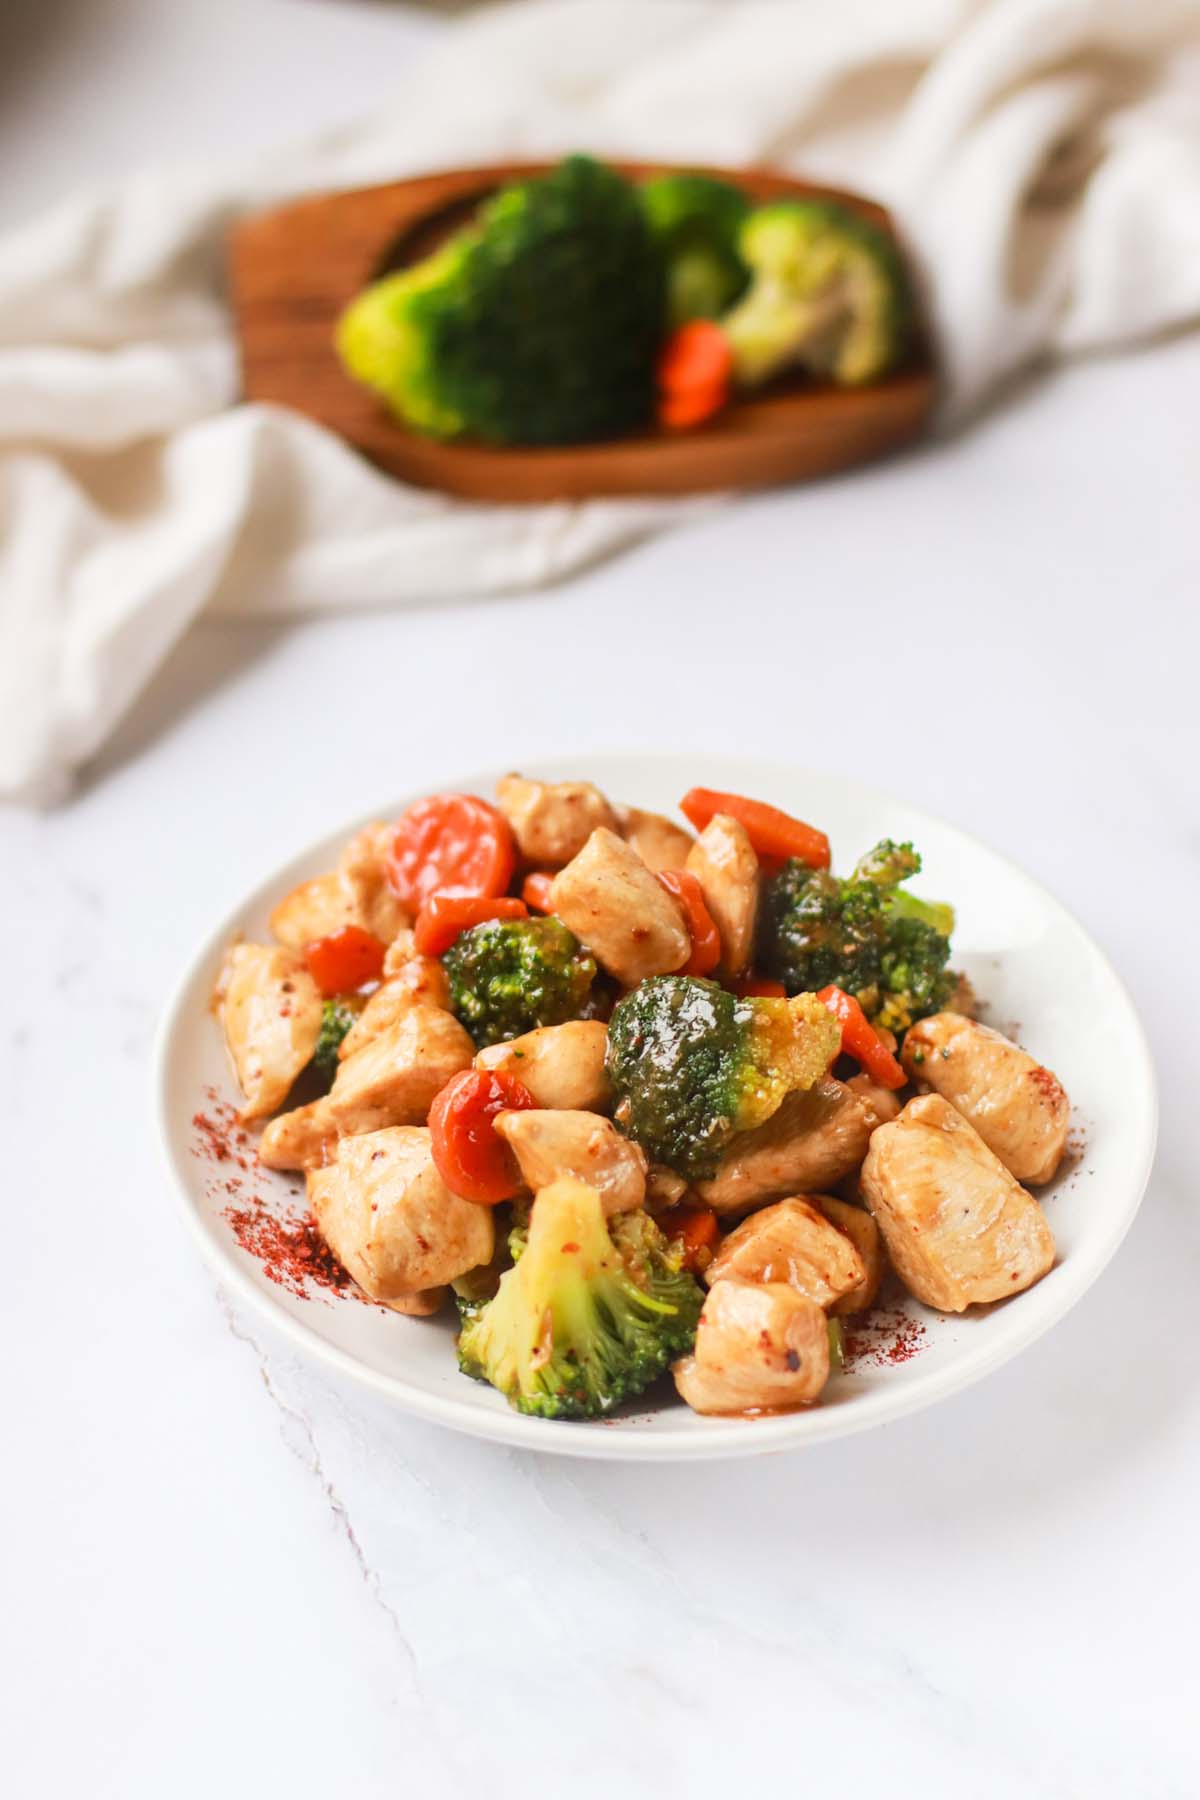 teriyaki chicken with vegetables on a plate.